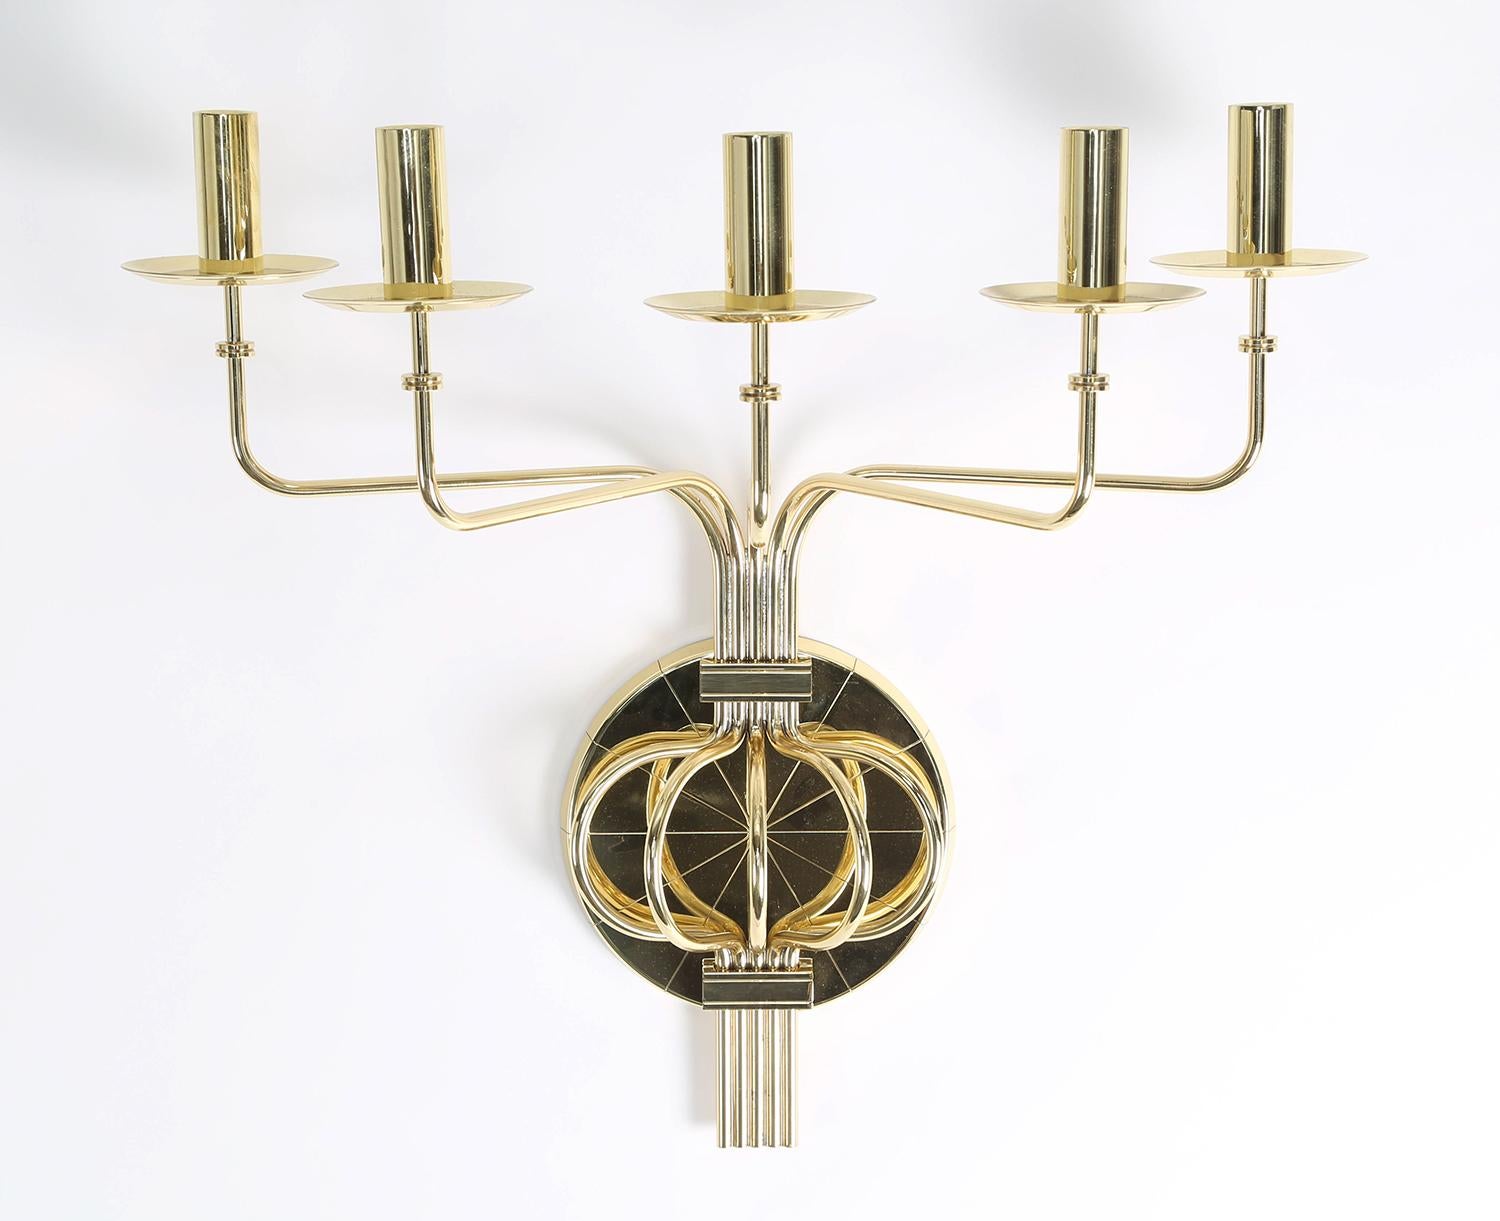 Pair of impressive 5 arm candelabra in polished brass by Tommi Parzinger for Dorlyn Silversmiths, American 1950's. These are just exquisite in person.